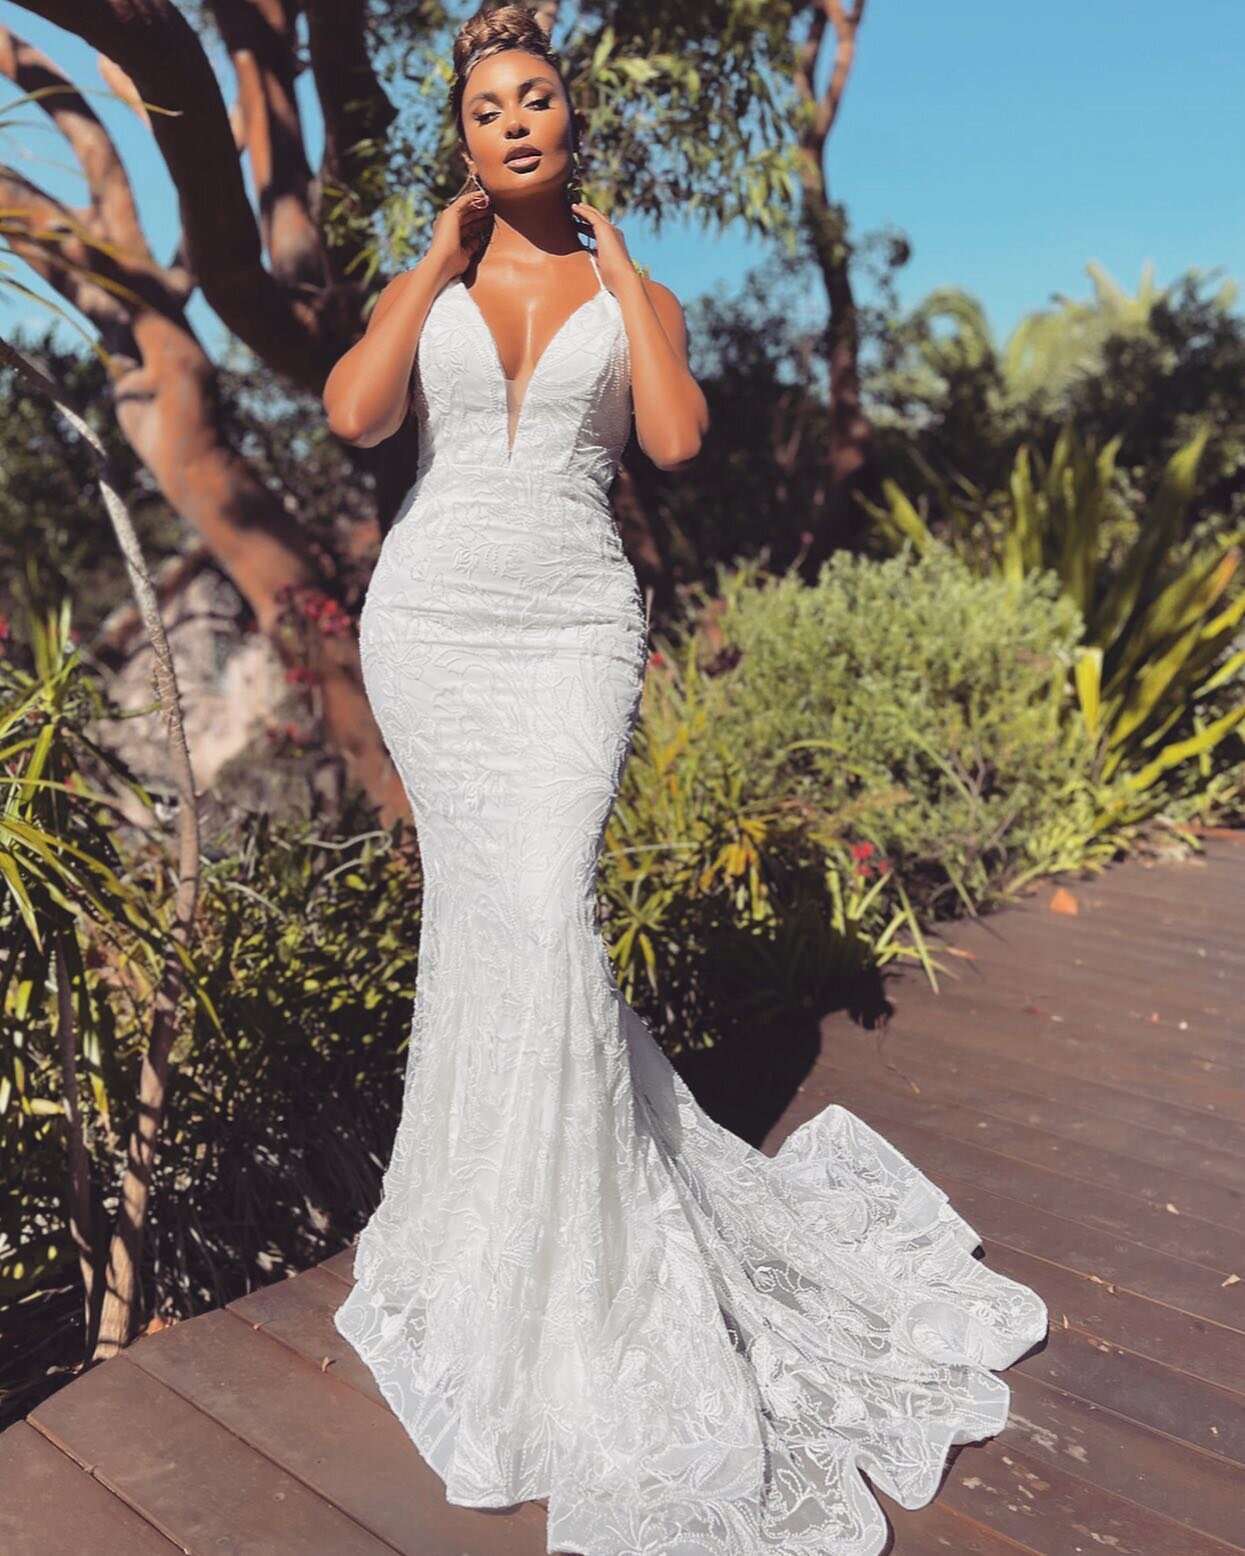 Phoenix 🤍 NEW TO HOUSE OF GOWNS!! 
We are very excited to now offer Jadore Gowns. This gorgeous bridal gown is a halter neck with plunging V and tie up back featuring sequins and beading. Simply stunning RRP $680